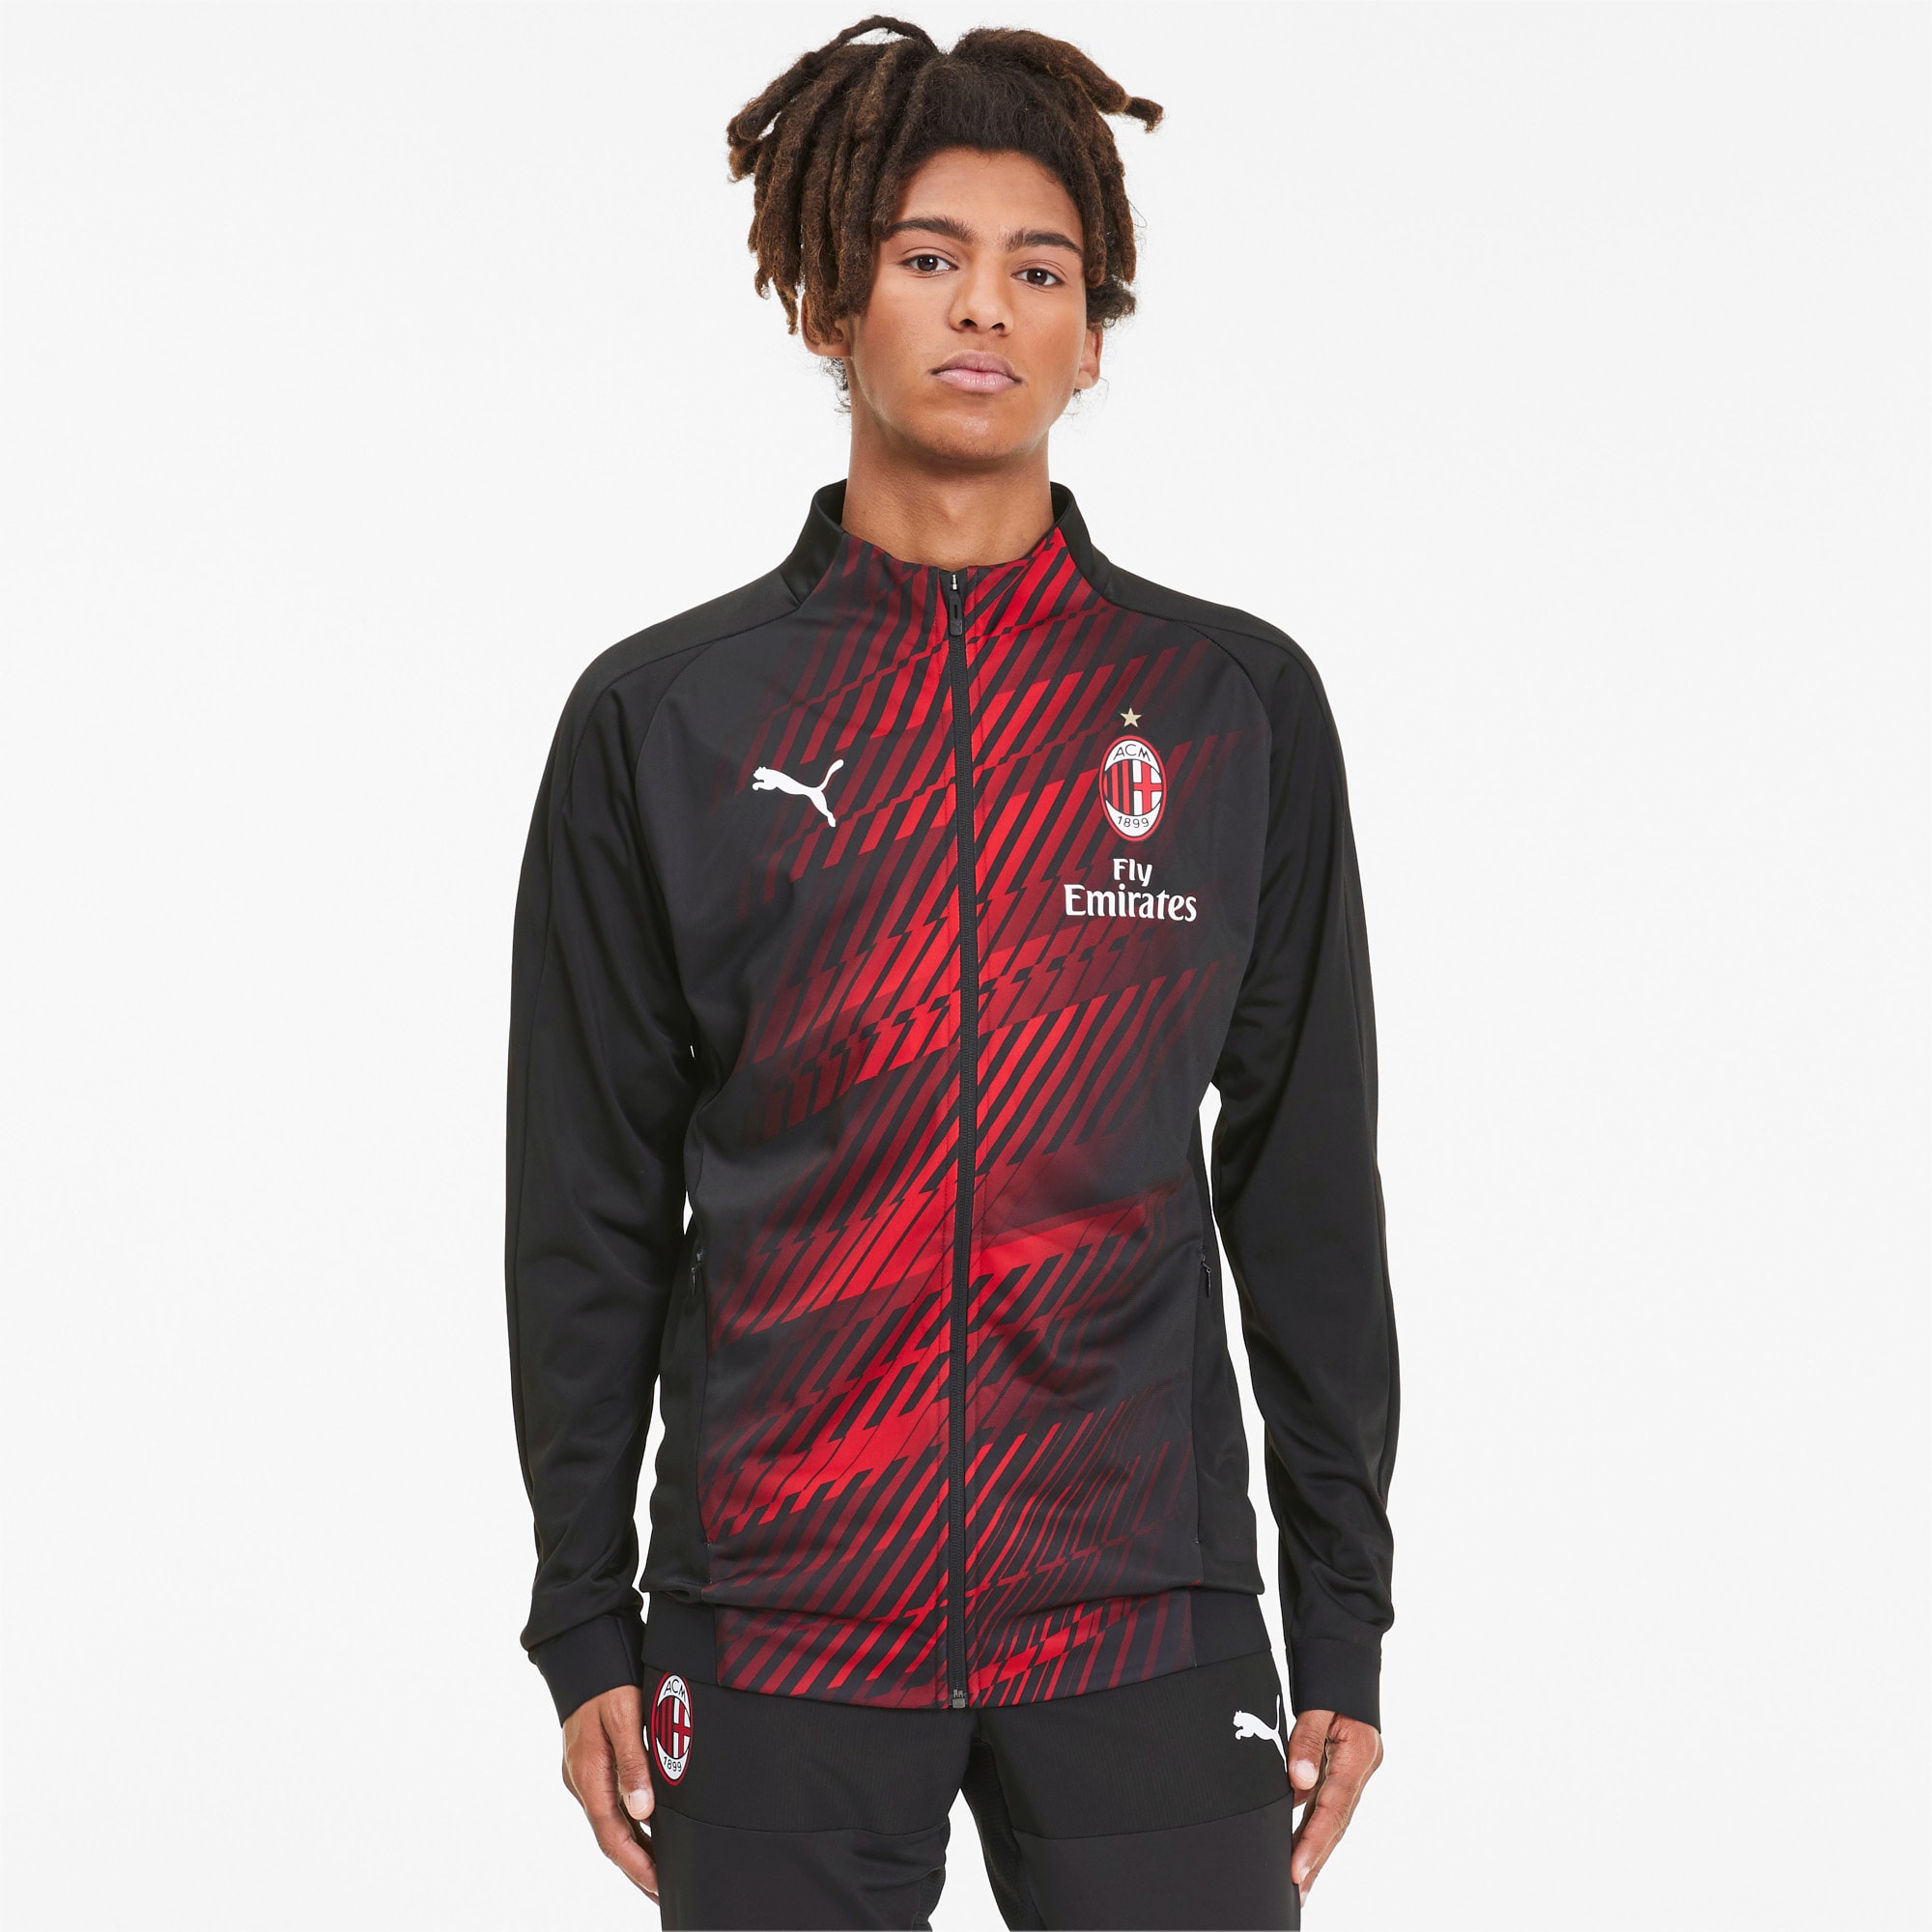 black and red puma jacket